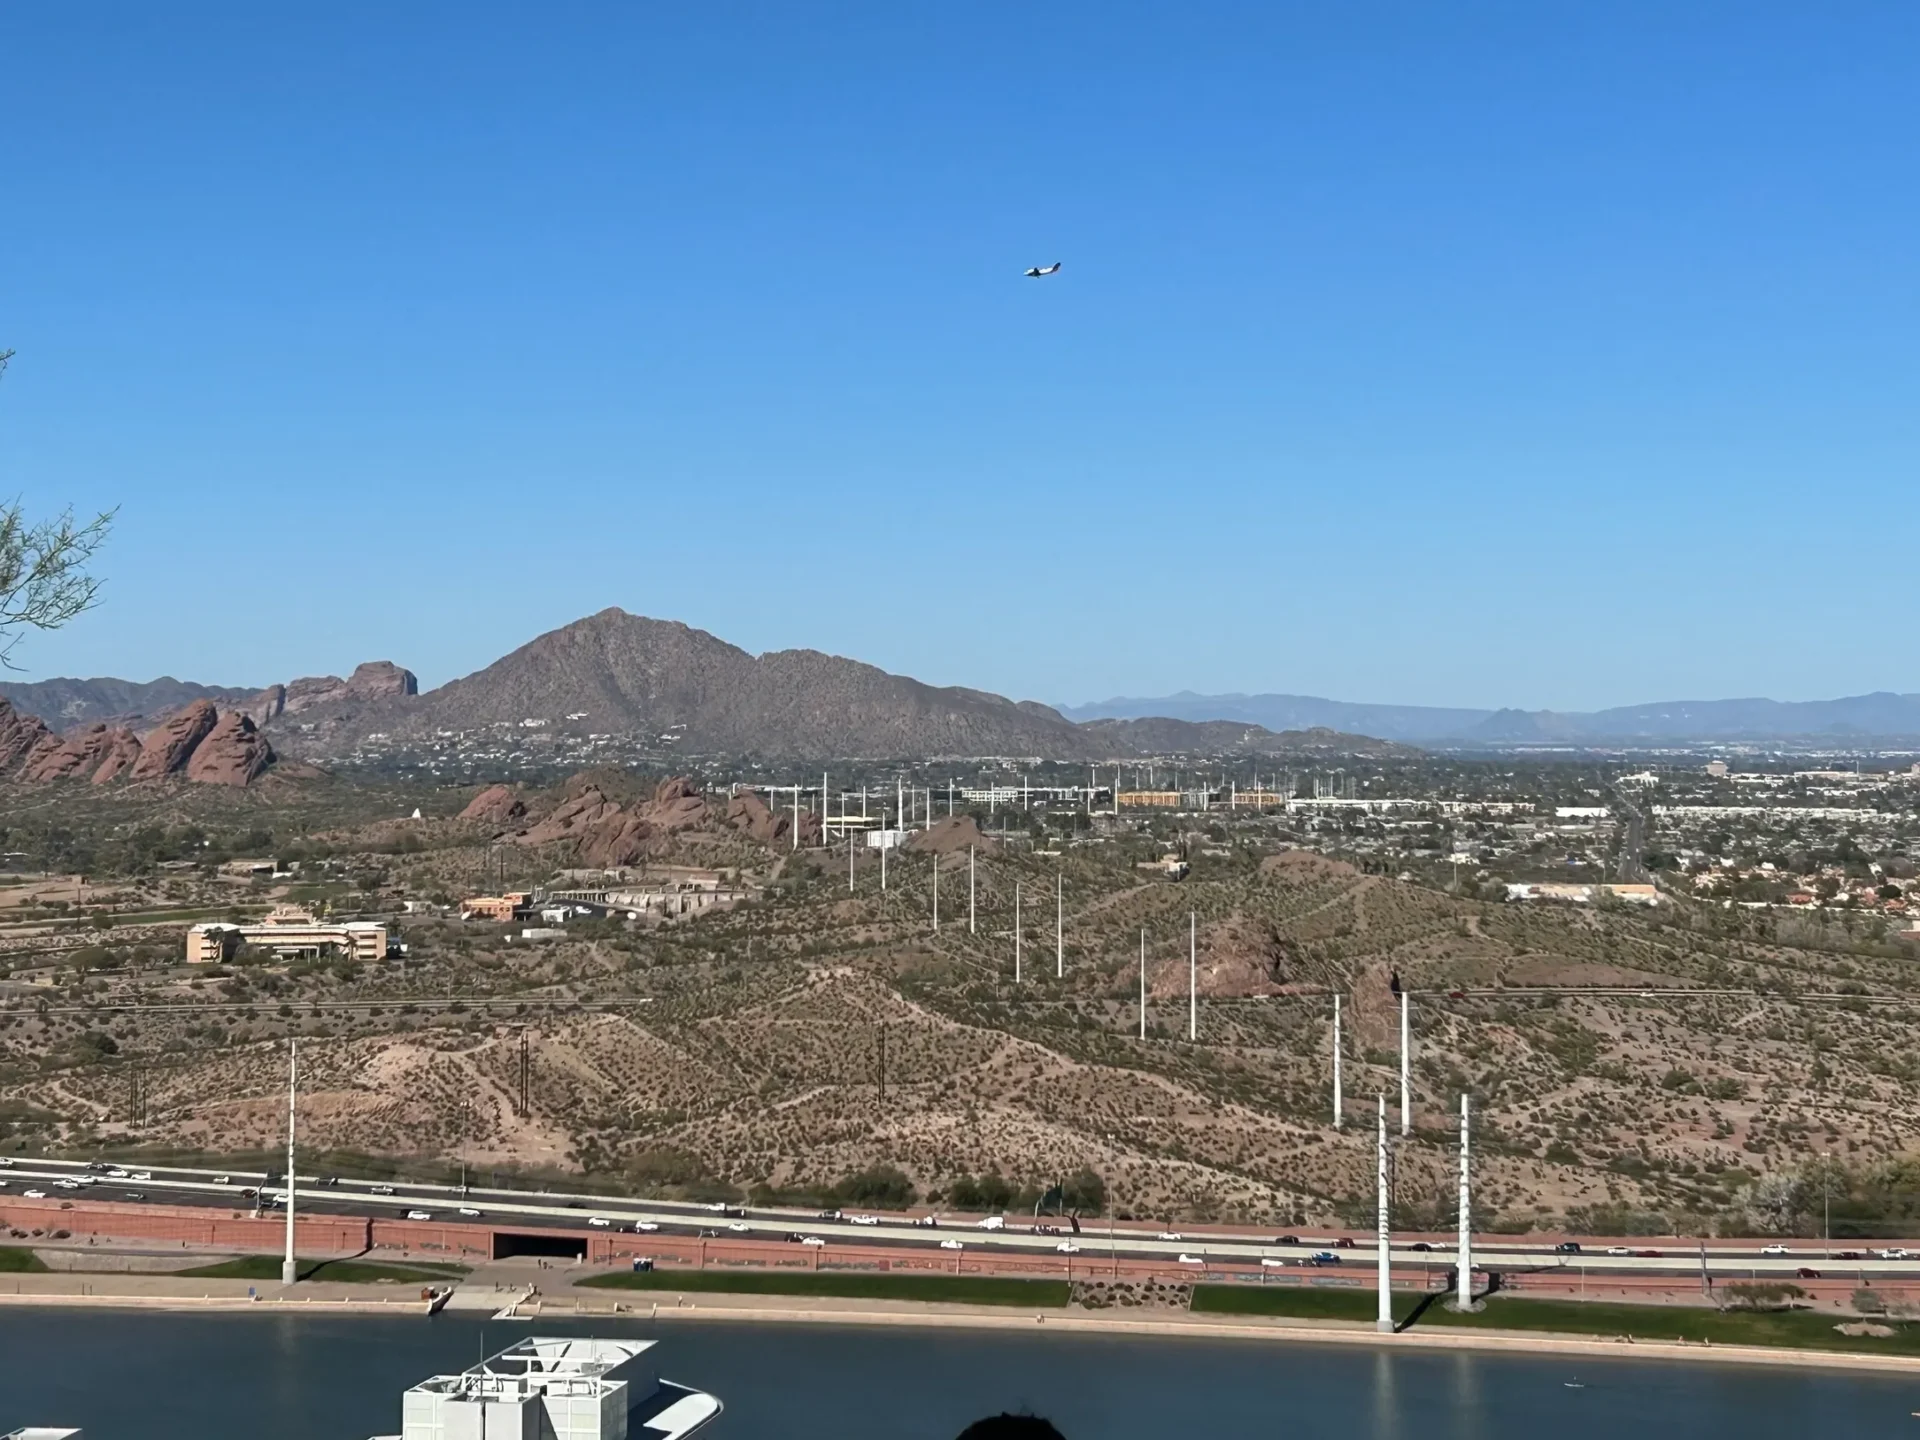 The view from A Mountain in Tempe.